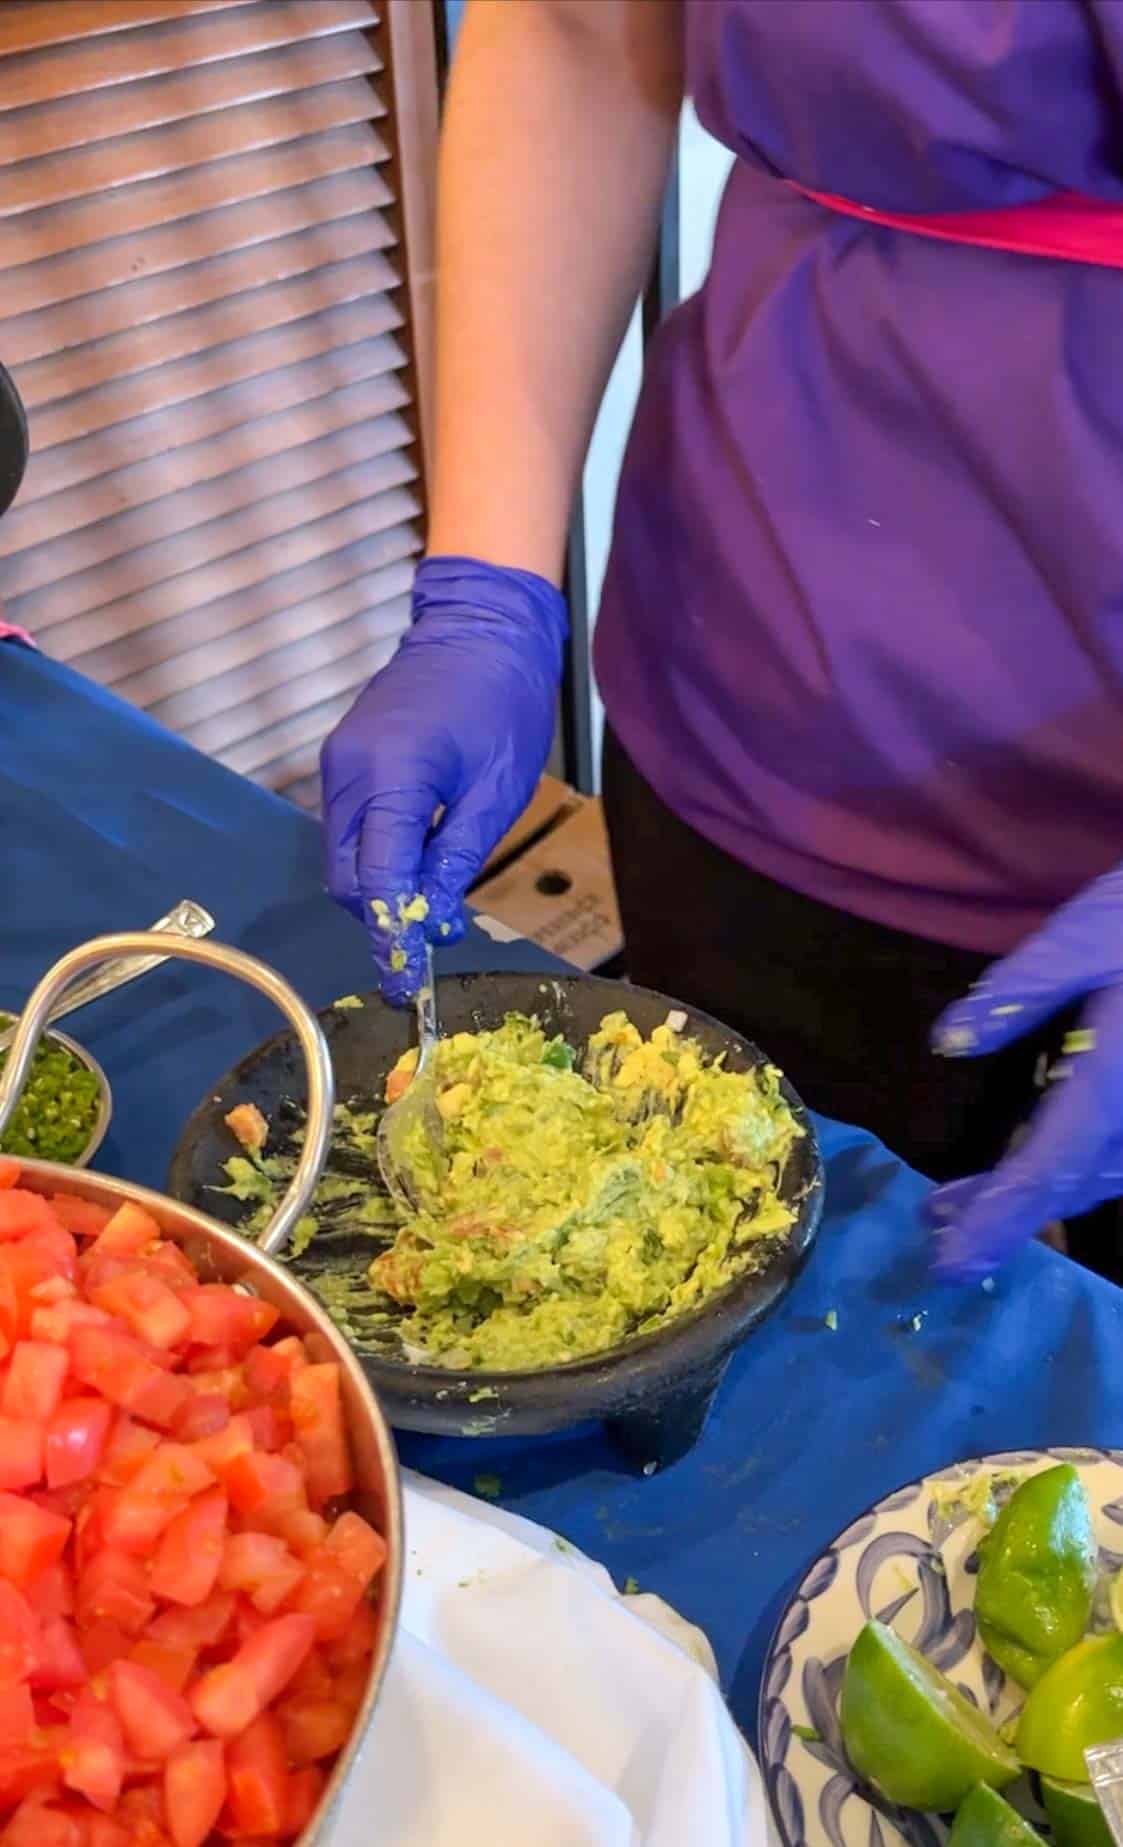 A hand with a purple plastic glove mixing guacamole in a black bowl on a blue table.